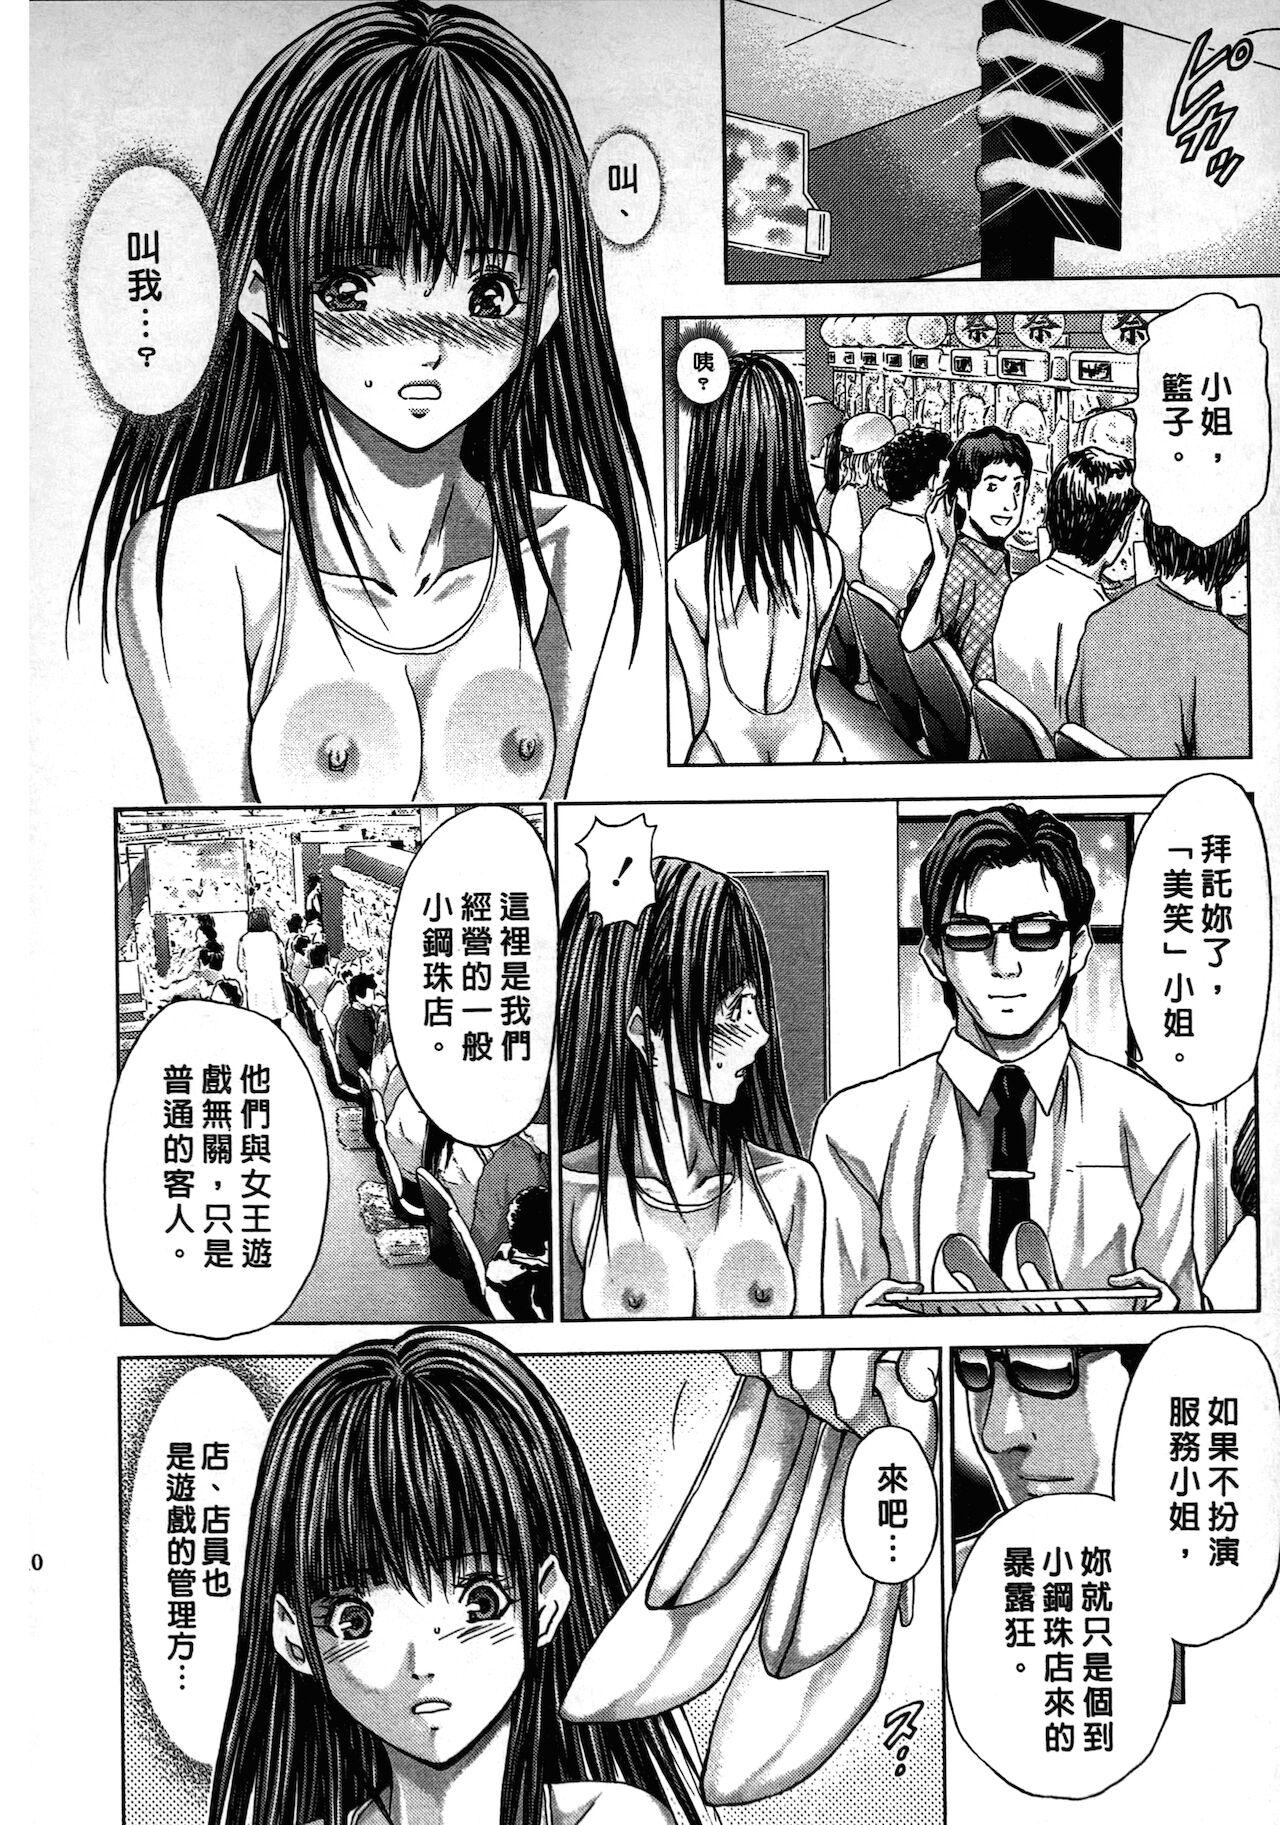 Rough Sex [Adachi Takumi] Queen's Game ~Haitoku no Mysterious Game~ 2 | 女王遊戲 ~背德的詭譎遊戲~ 2 [Chinese] Jerk Off - Page 10